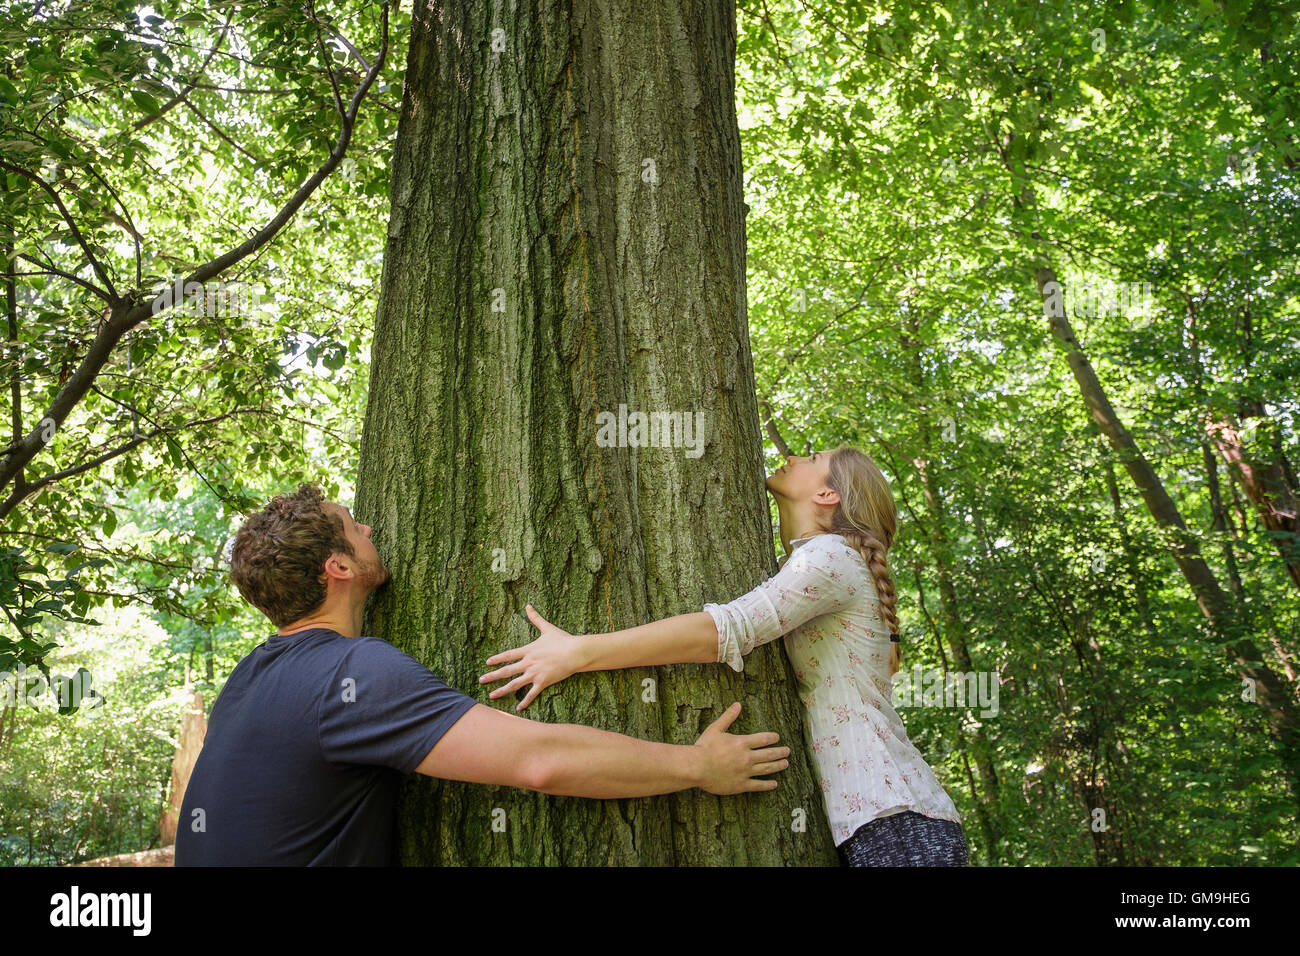 Couple hugging tree Banque D'Images